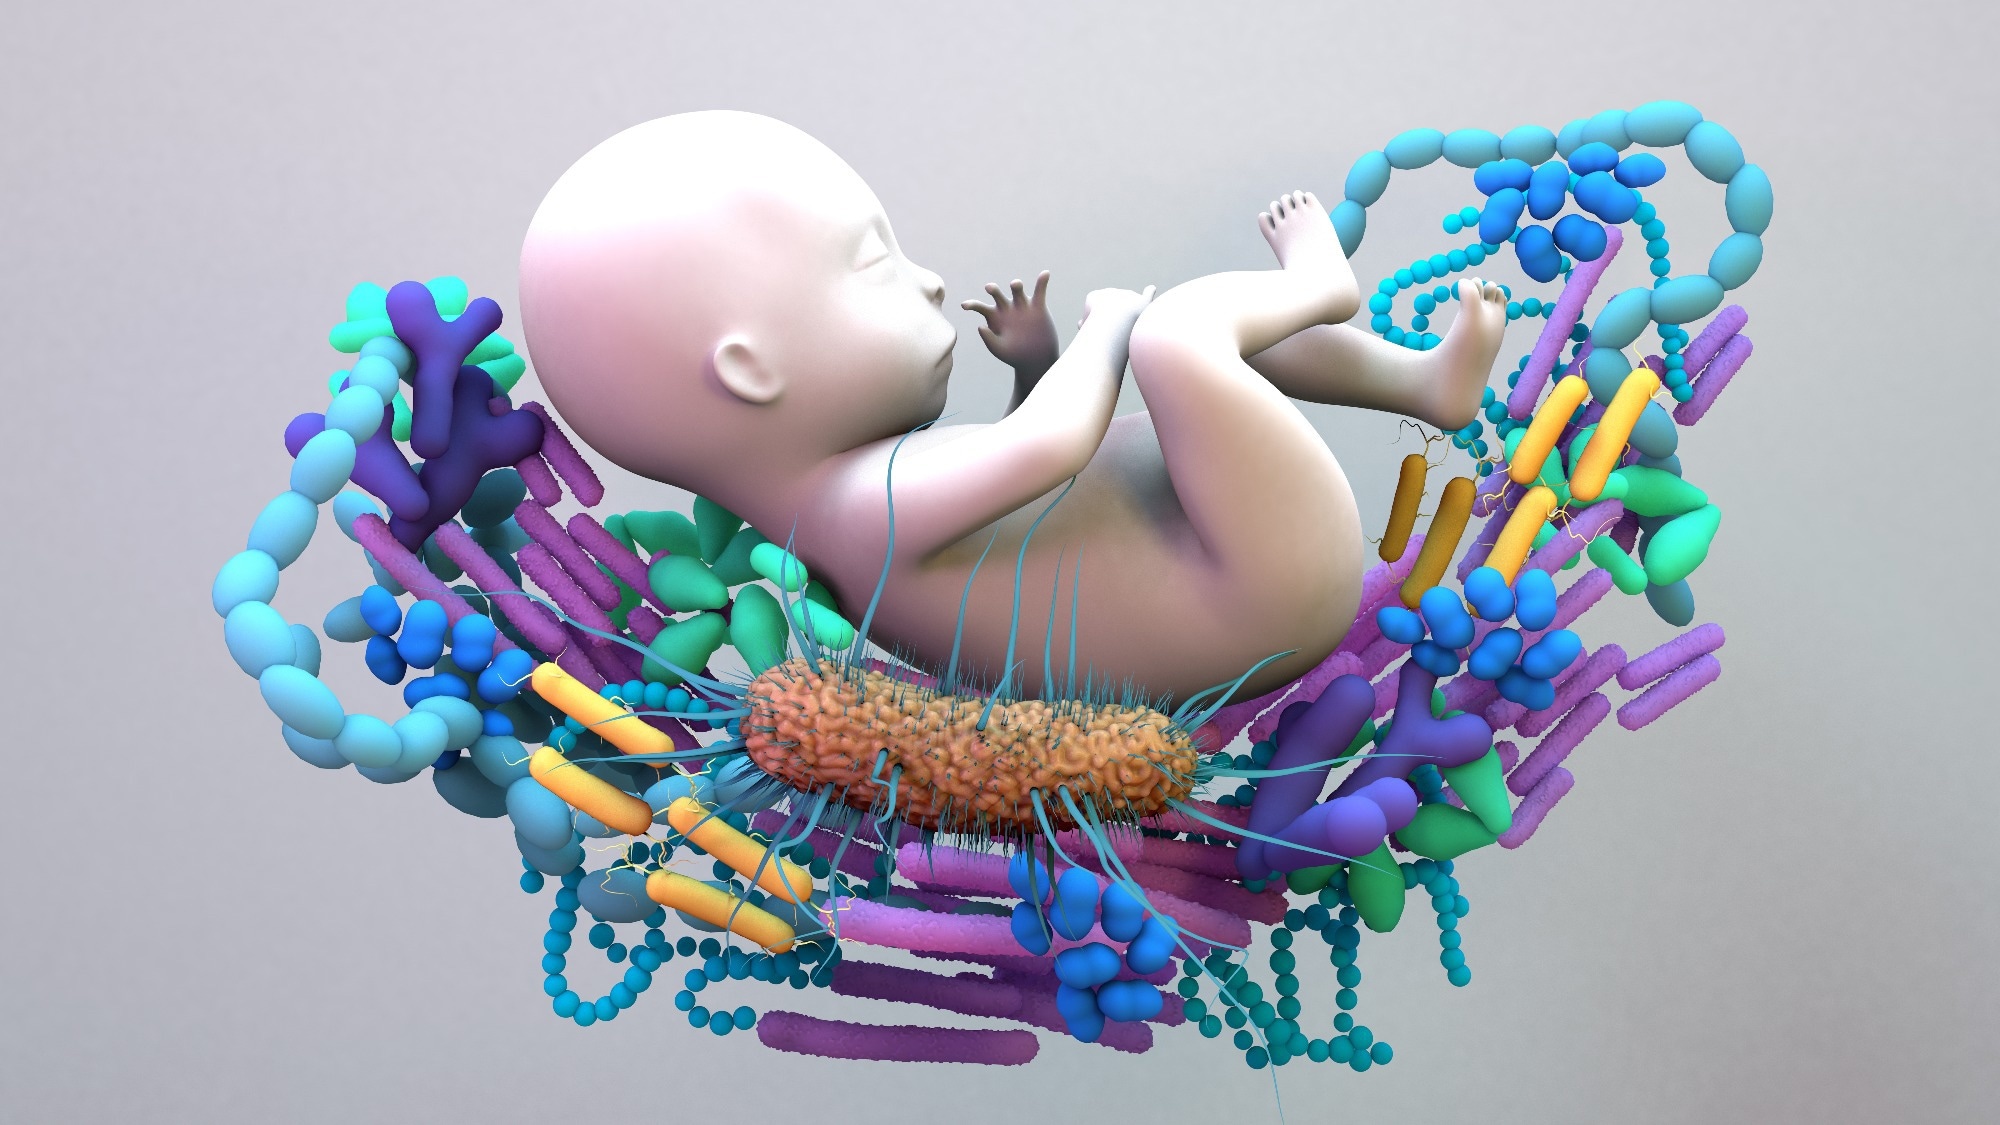 Study: Gut microbiome predicts atopic diseases in an infant cohort with reduced bacterial exposure due to social distancing. Image Credit: Design_Cells / Shutterstock